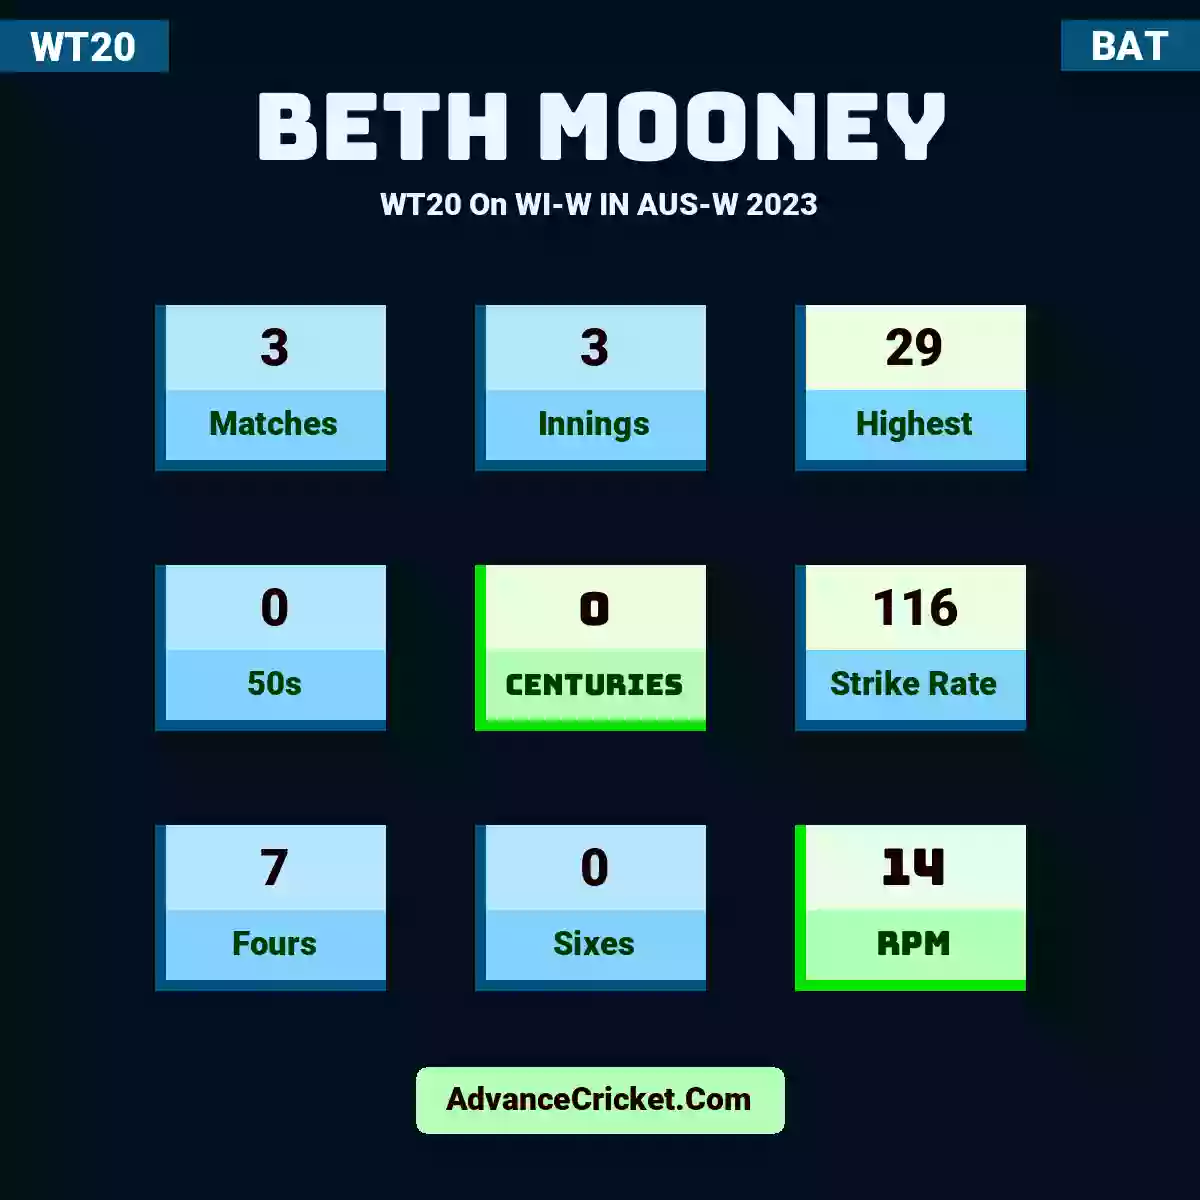 Beth Mooney WT20  On WI-W IN AUS-W 2023, Beth Mooney played 3 matches, scored 29 runs as highest, 0 half-centuries, and 0 centuries, with a strike rate of 116. B.Mooney hit 7 fours and 0 sixes, with an RPM of 14.